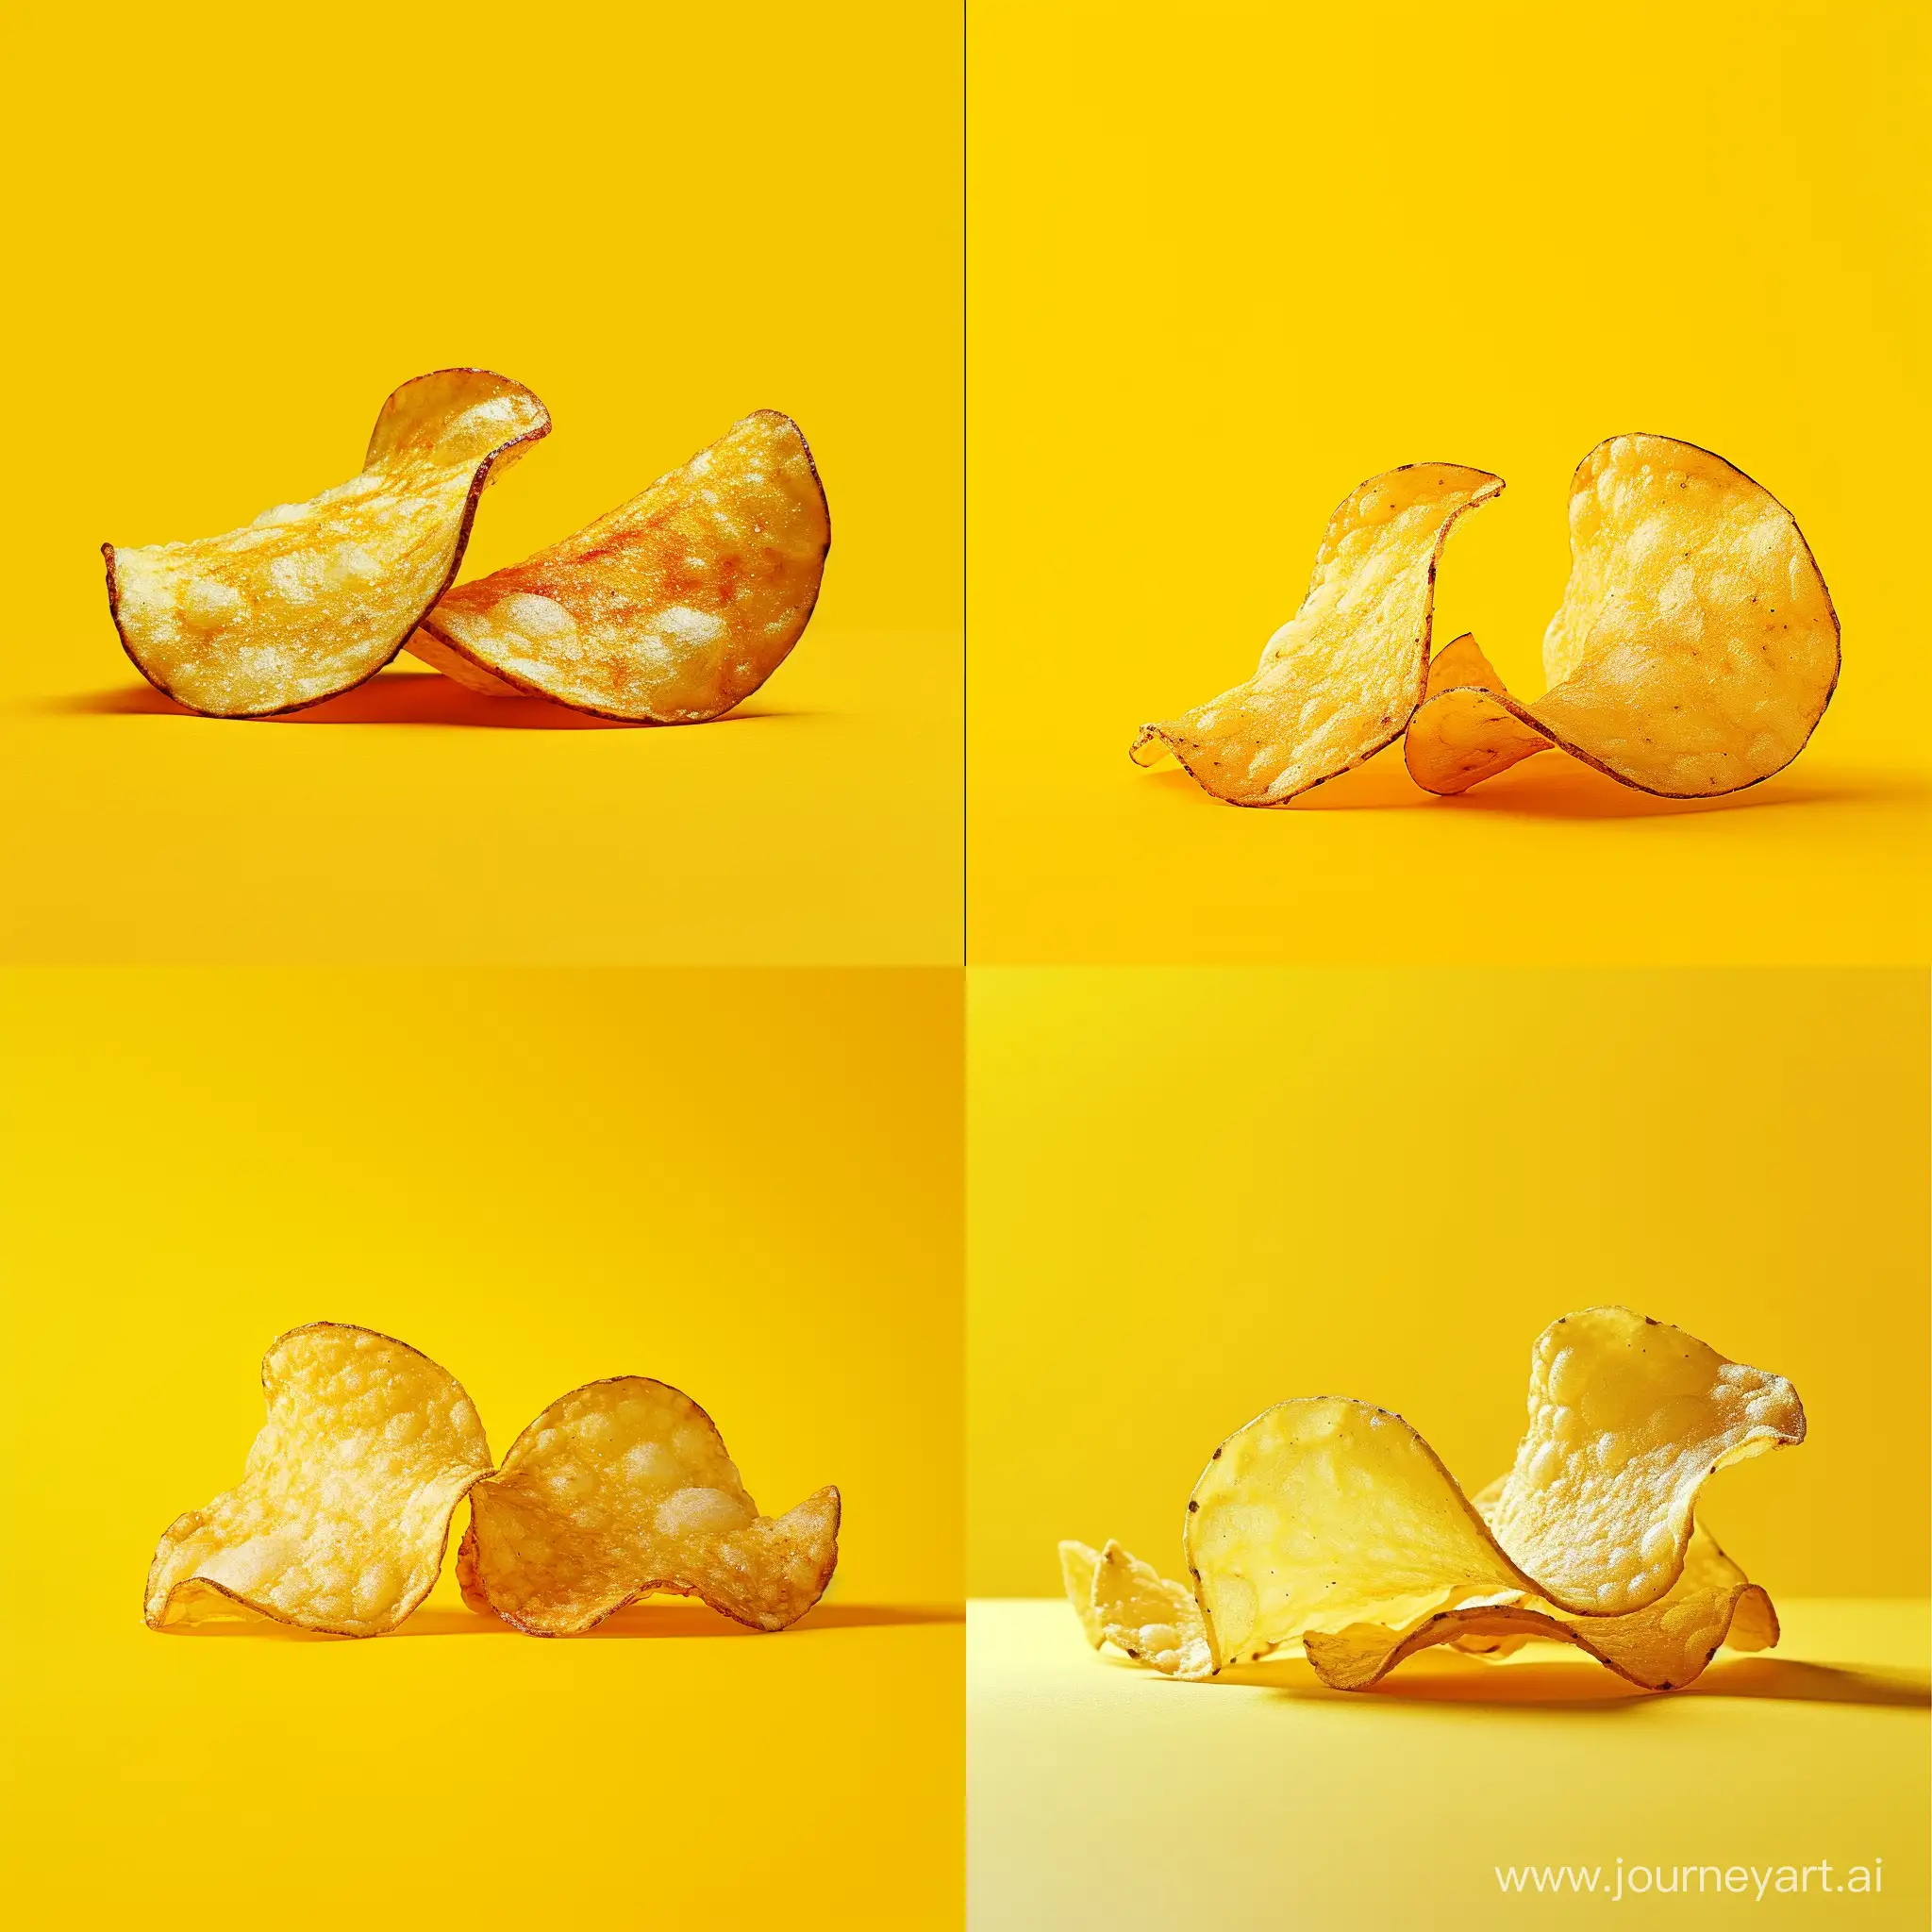 Crunchy-Potato-Chips-Duo-Irresistible-Snack-Captured-in-Vivid-Detail